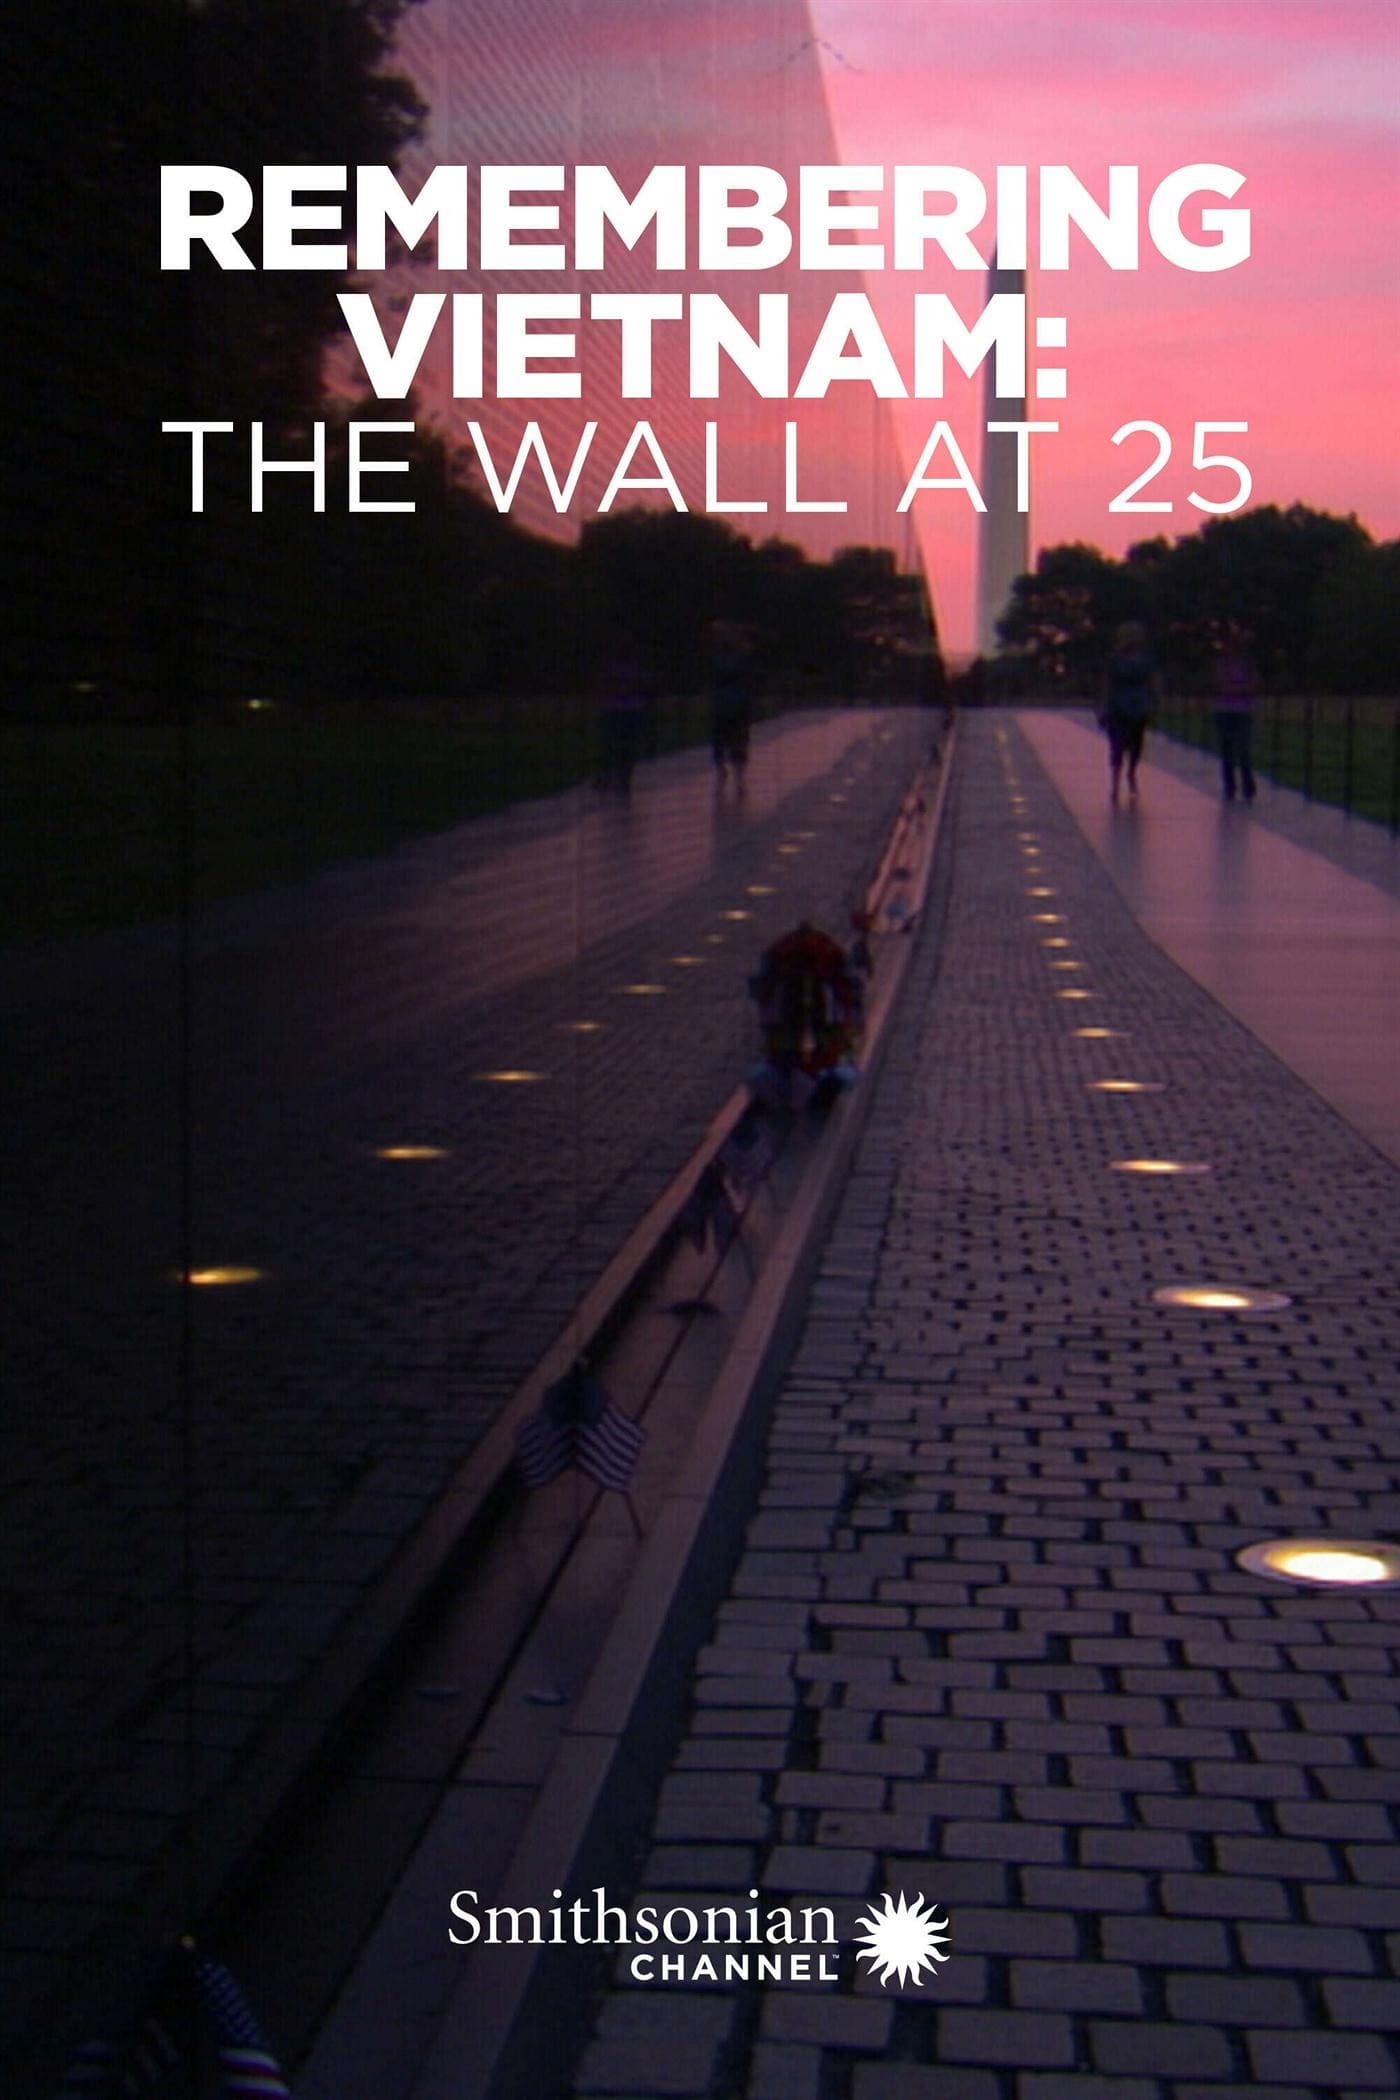 Remembering Vietnam: The Wall at 25